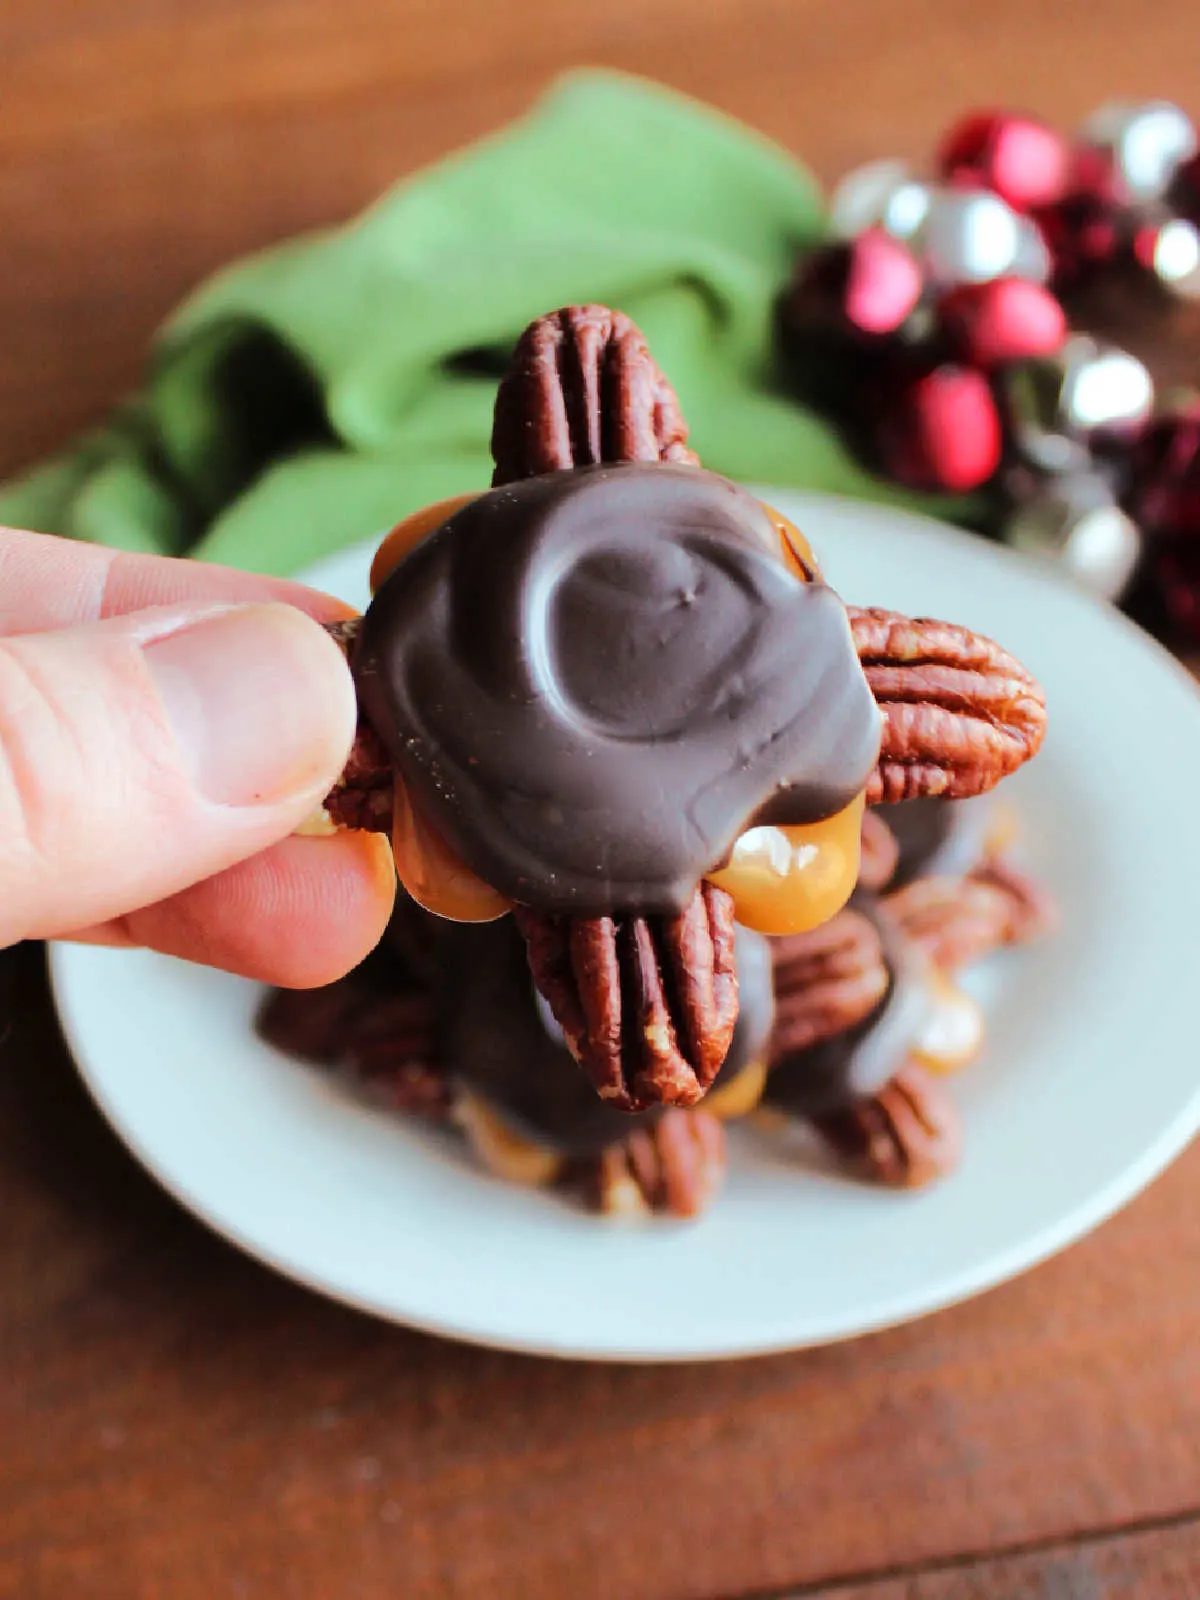 Hand holding homemade turtle candy with pecans, rich caramel, and chocolate.